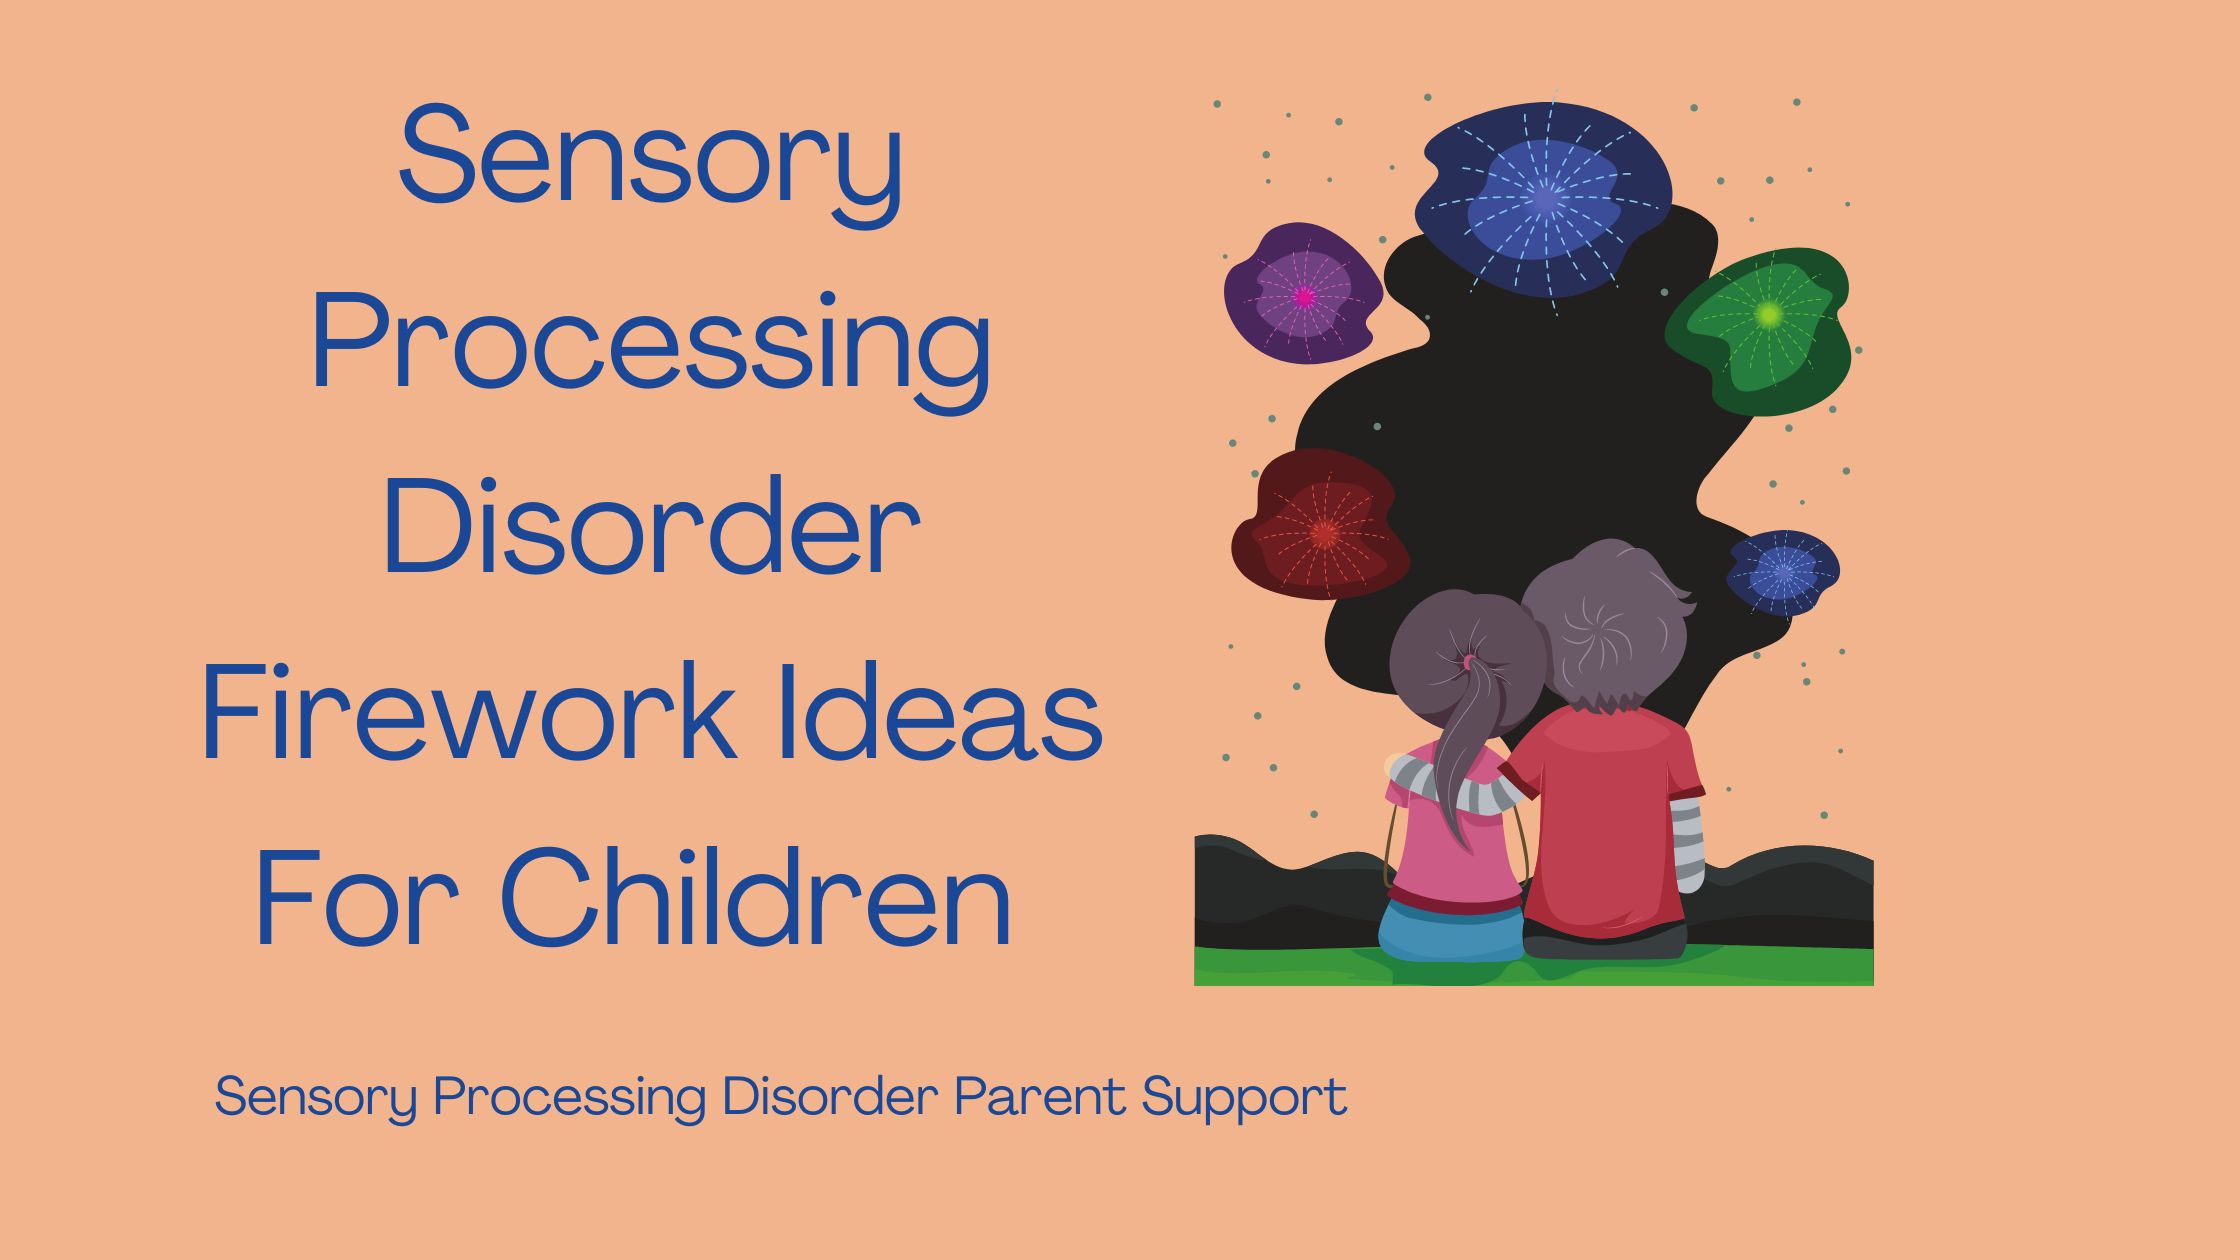 two children with sensory processing disorder watching the fireworks Sensory Processing Disorder Firework Ideas For Children